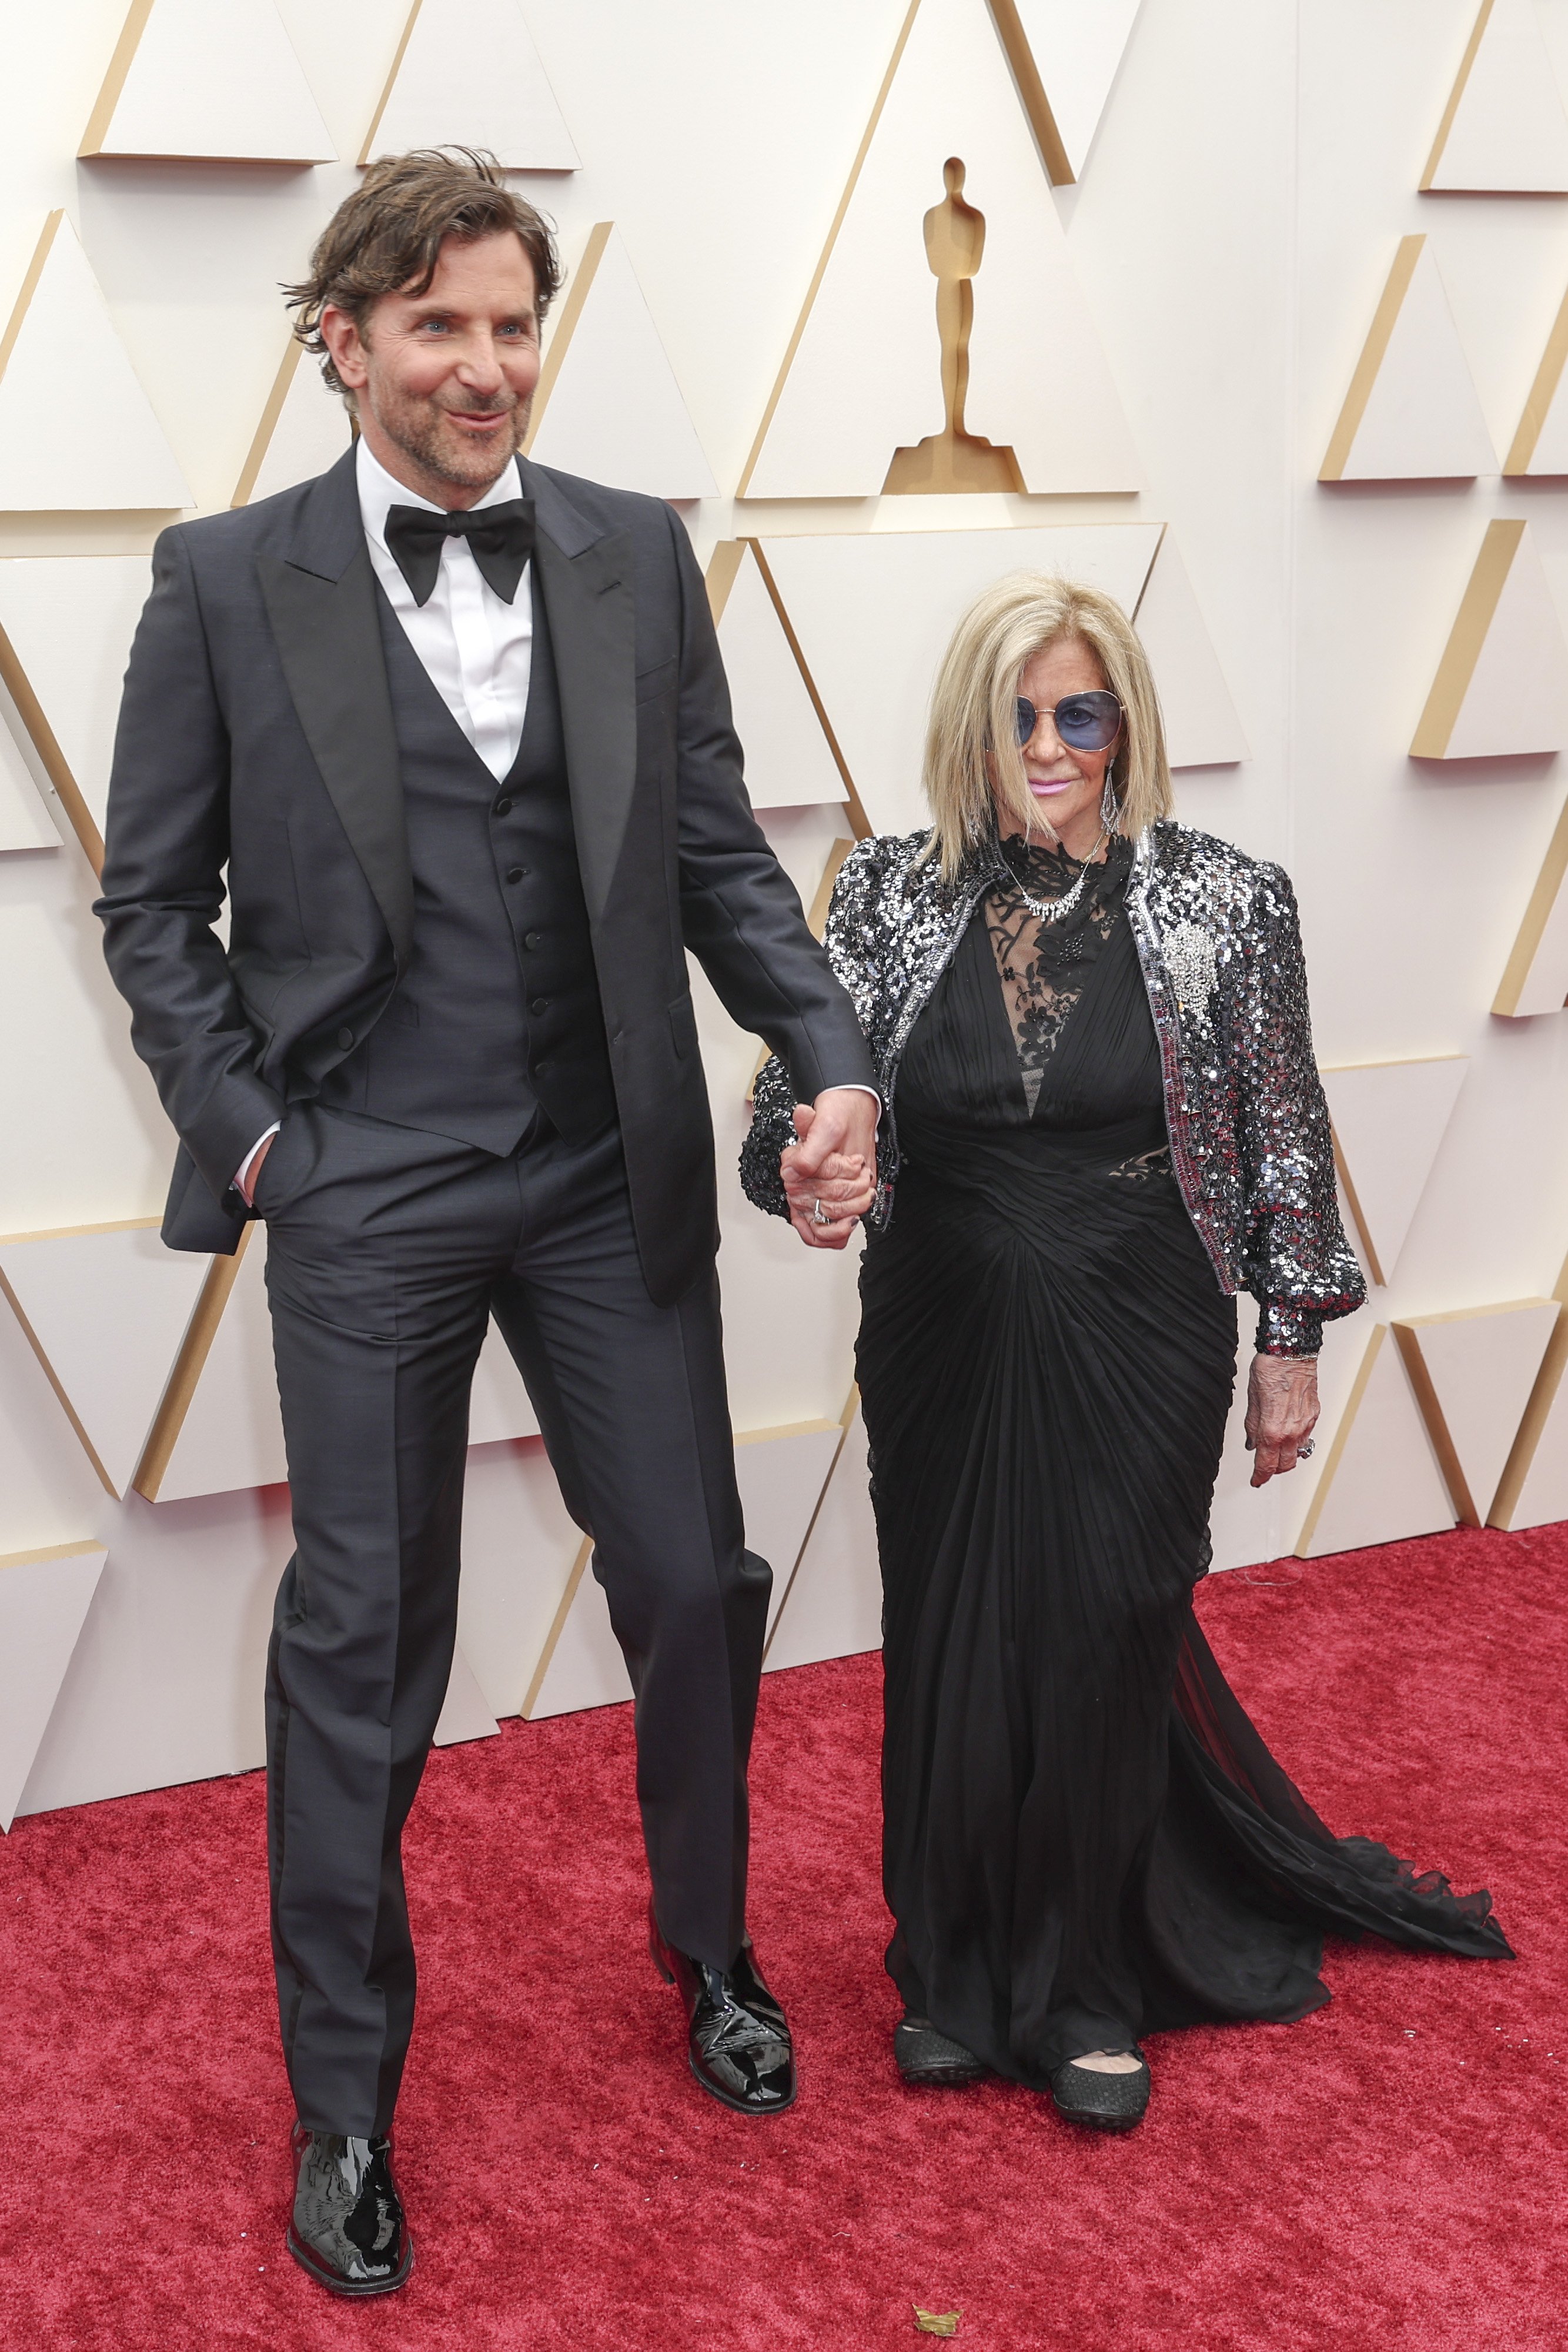  Bradley Cooper and his mother Gloria Campano arriving at the 94th Academy Awards at the Dolby Theatre at Ovation Hollywood on Sunday, March 27, 2022. | Source: Getty Images